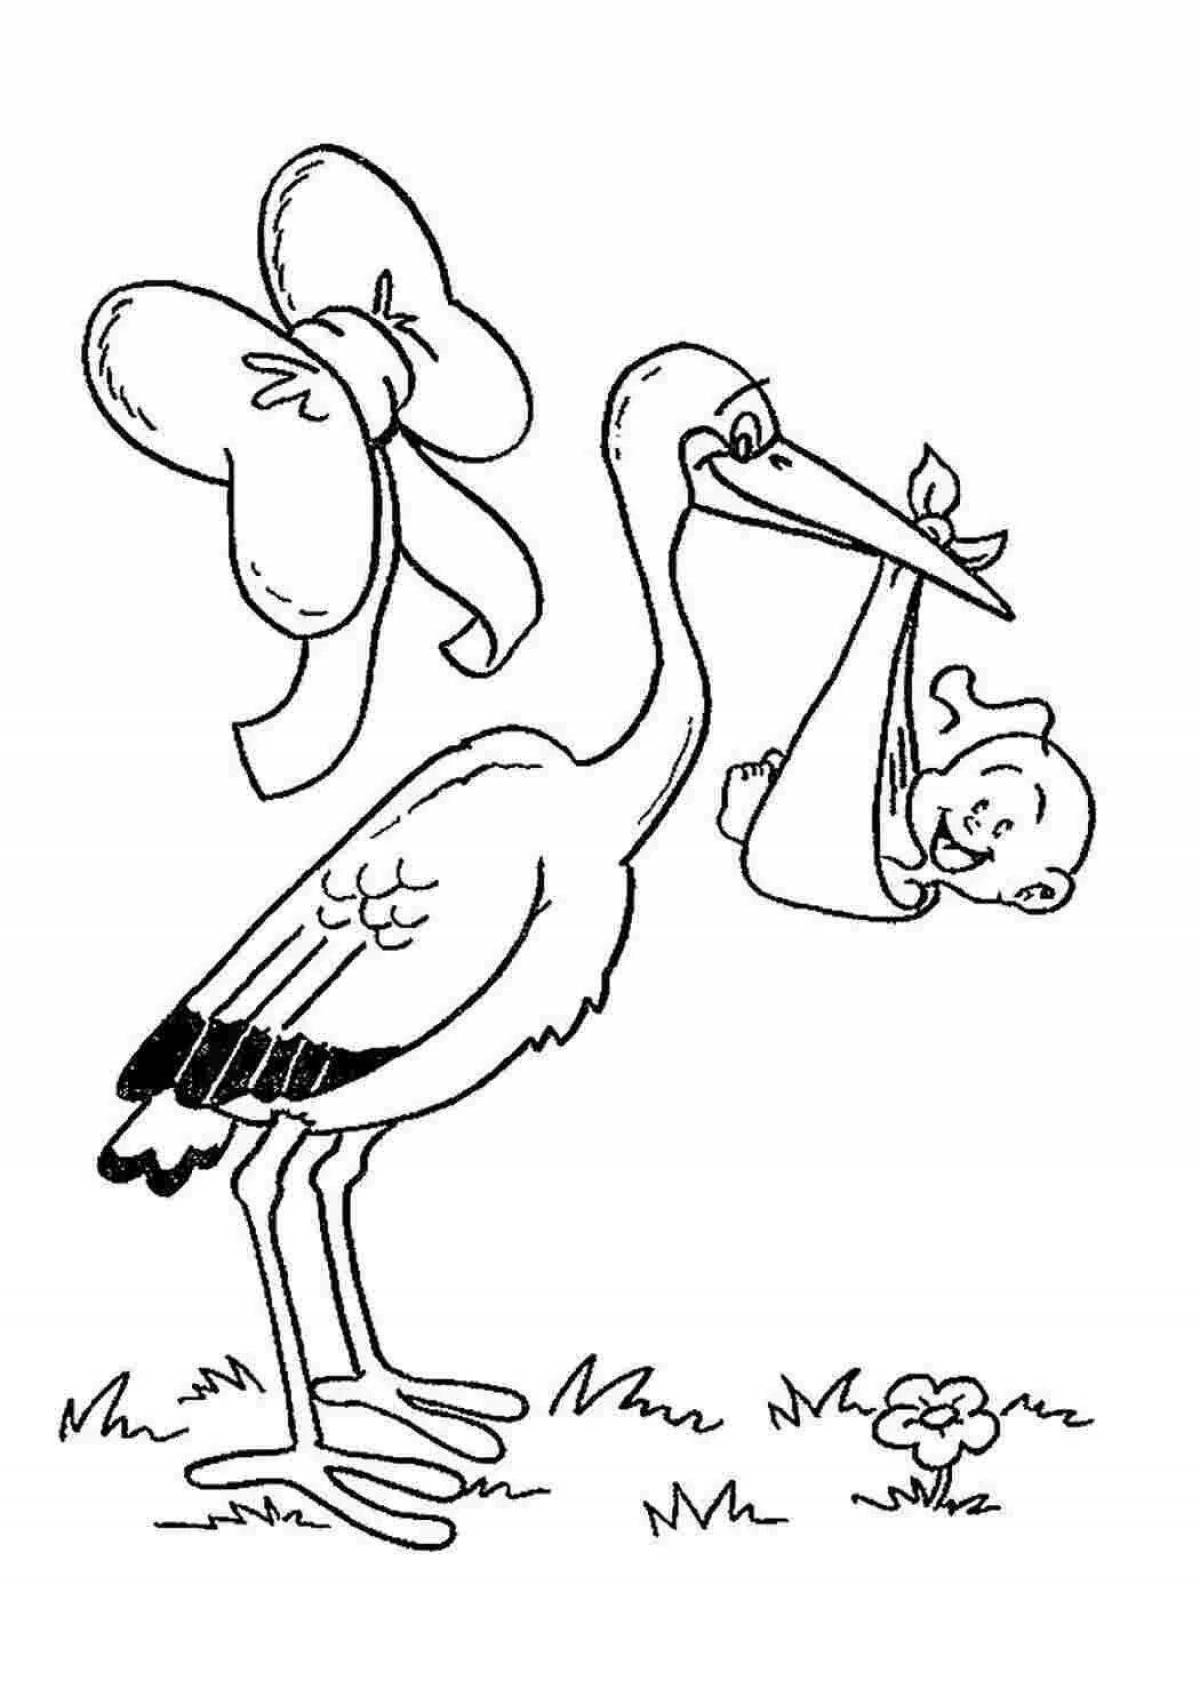 Adorable stork with baby coloring book